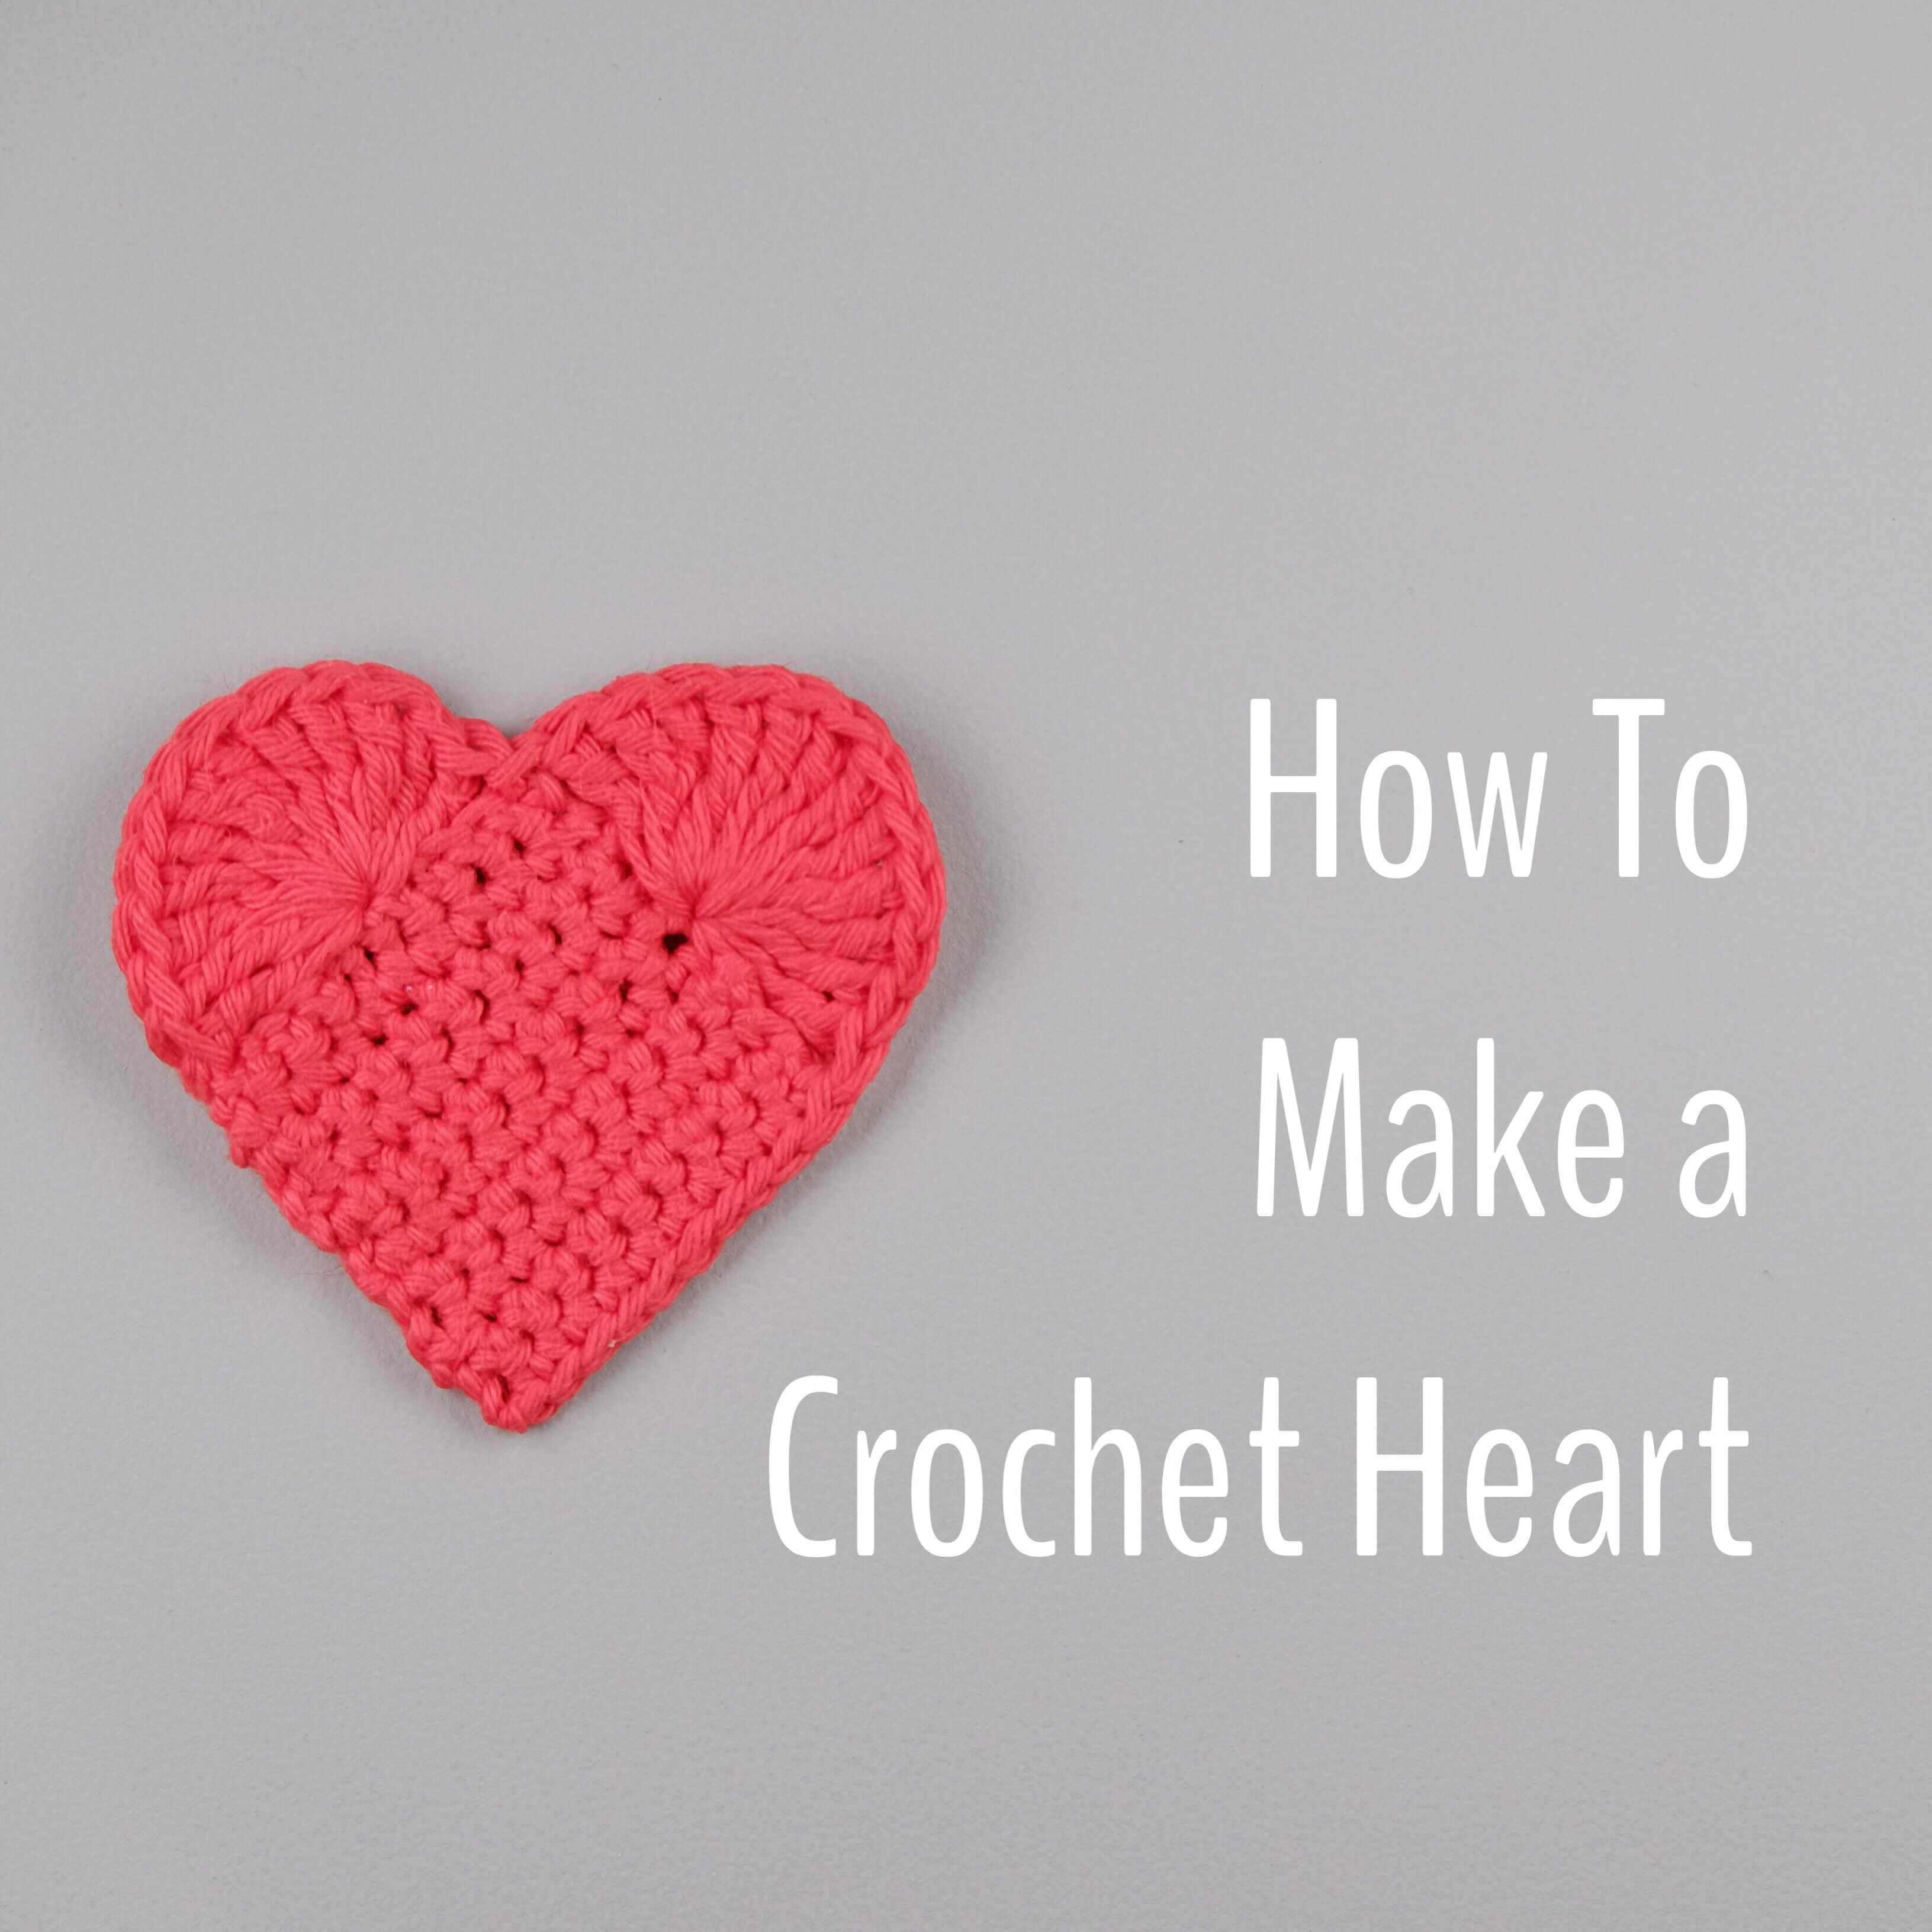 Crochet Heart Pattern Crochet Heart Pattern Quick And Easy Tutorial Crochet Coach